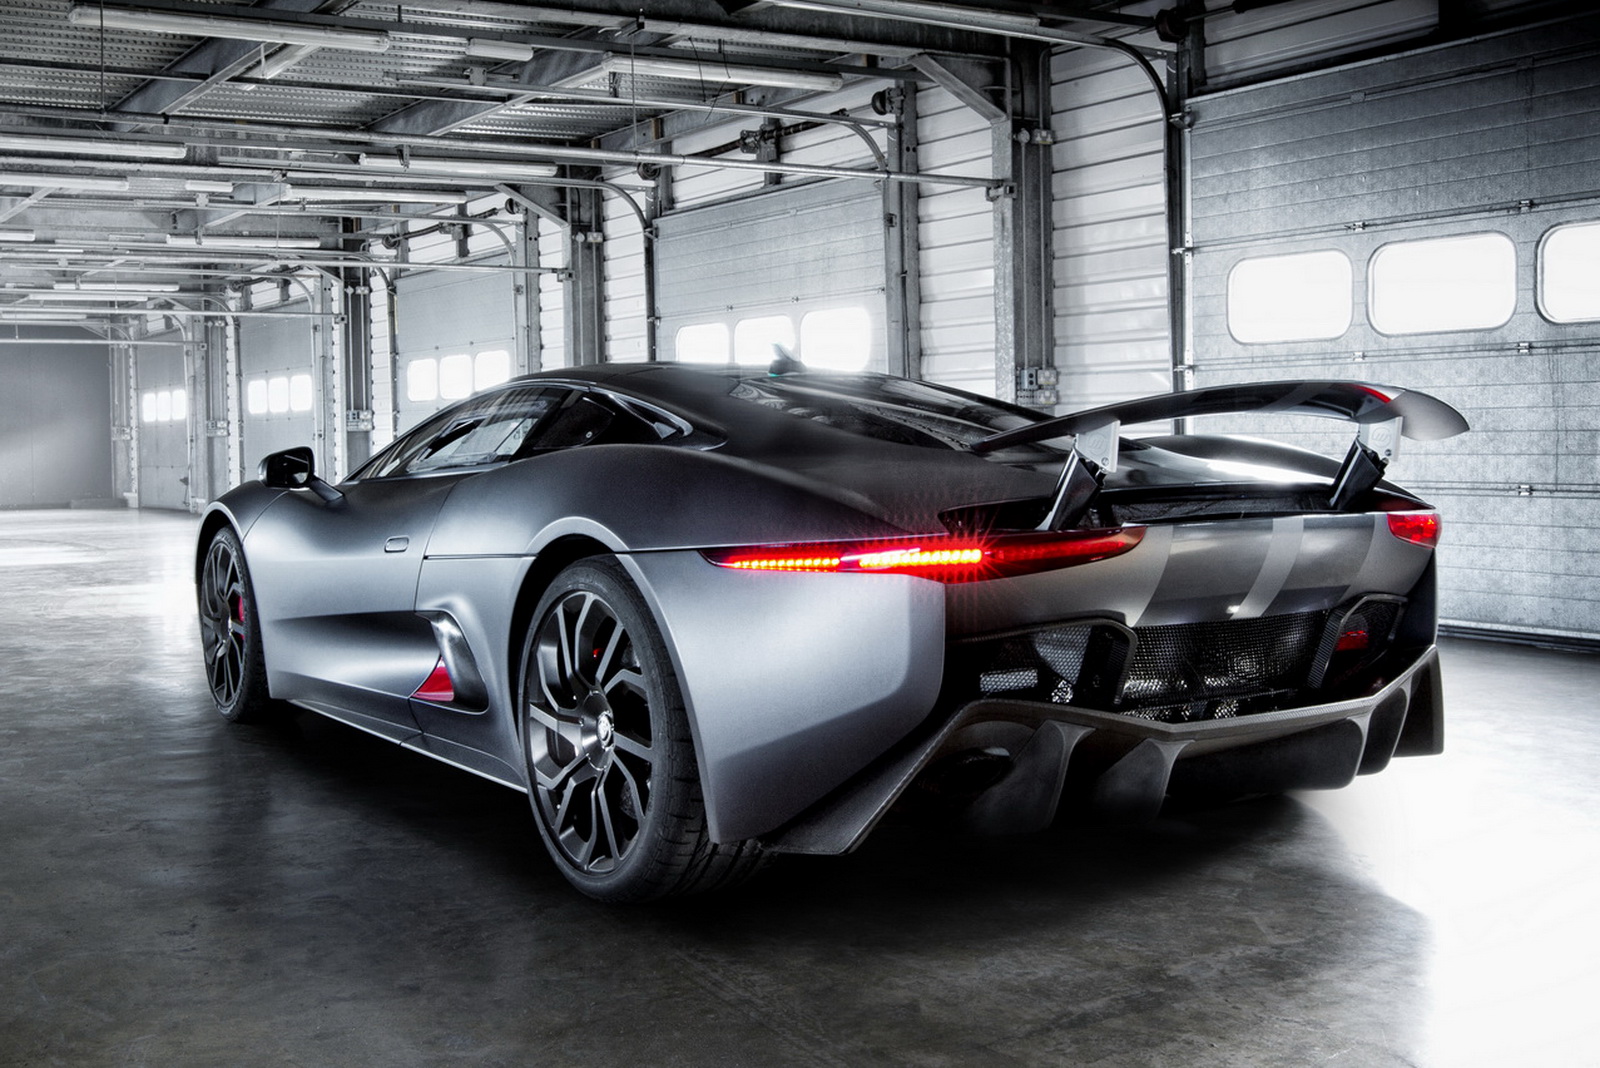 X75 Supercar Could Return As F-Type Successor, Mid-Engined Layout Possible